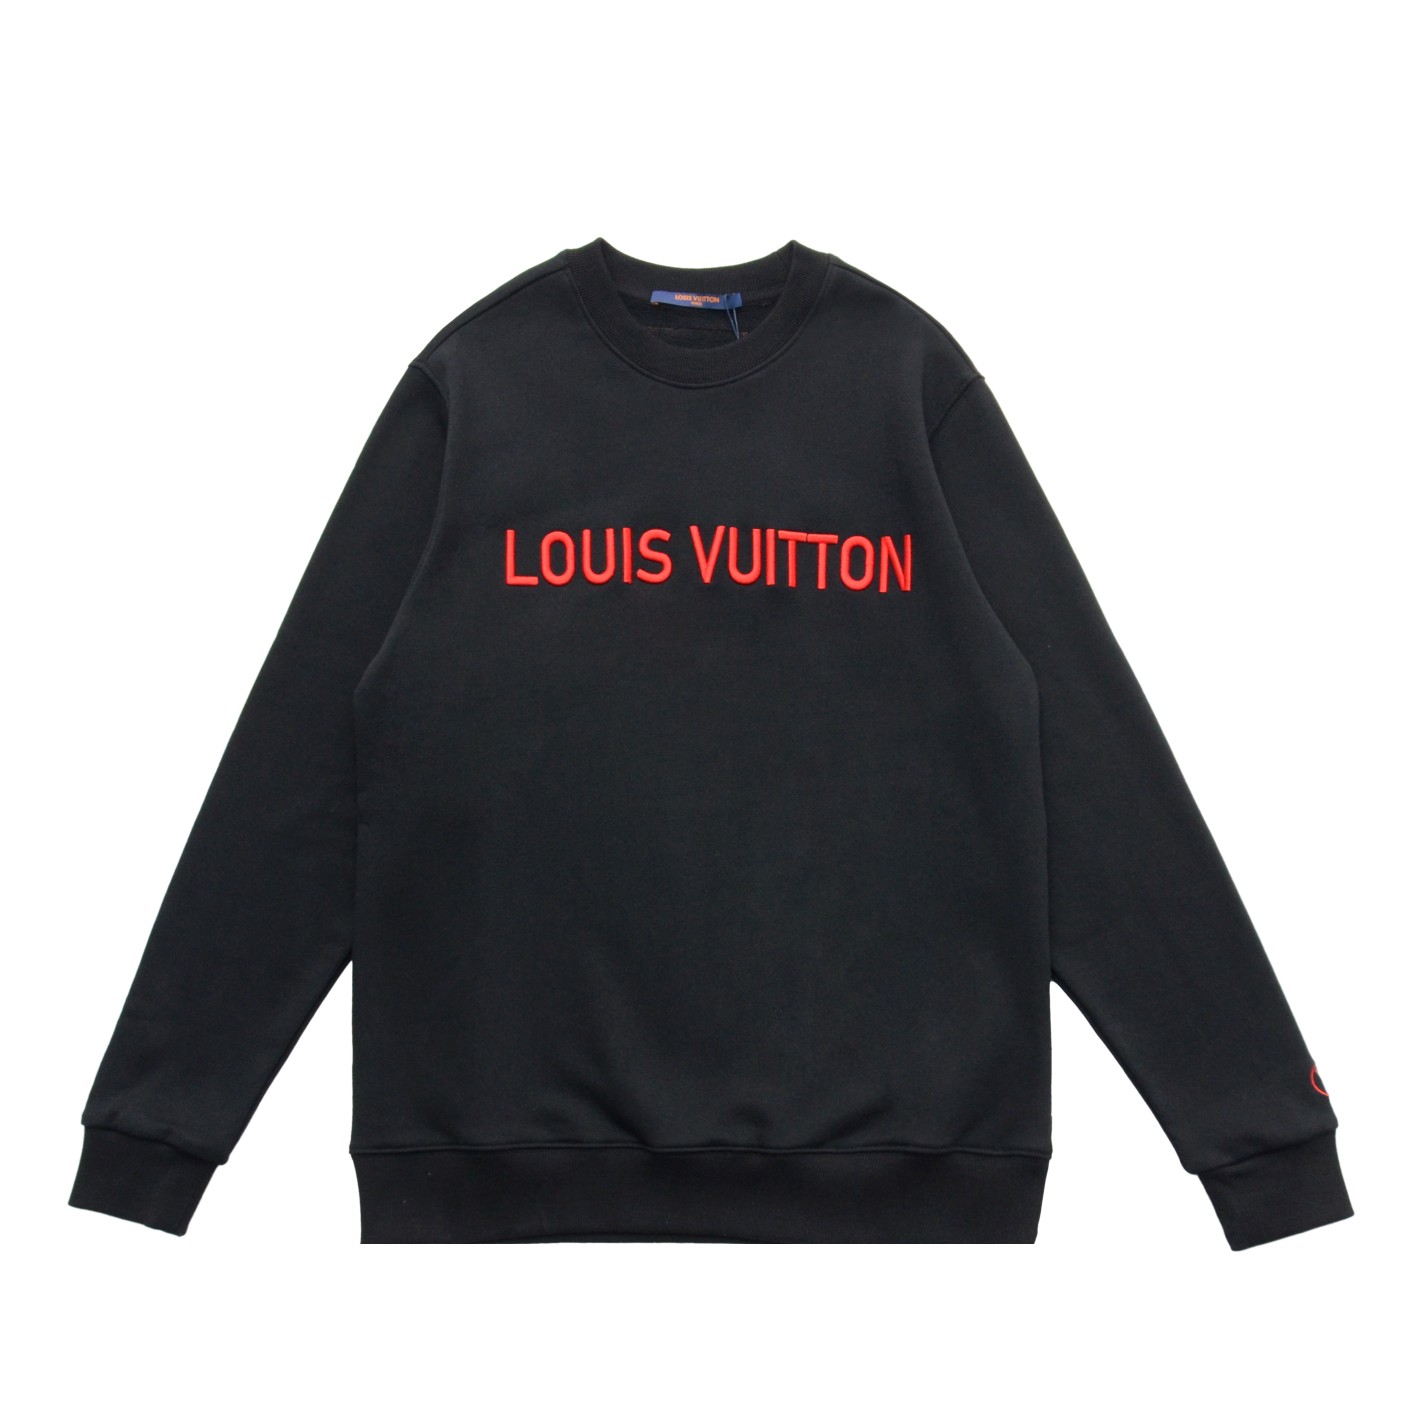 Louis Vuitton Clothing Sweatshirts Black Red White Embroidery Unisex Fall/Winter Collection